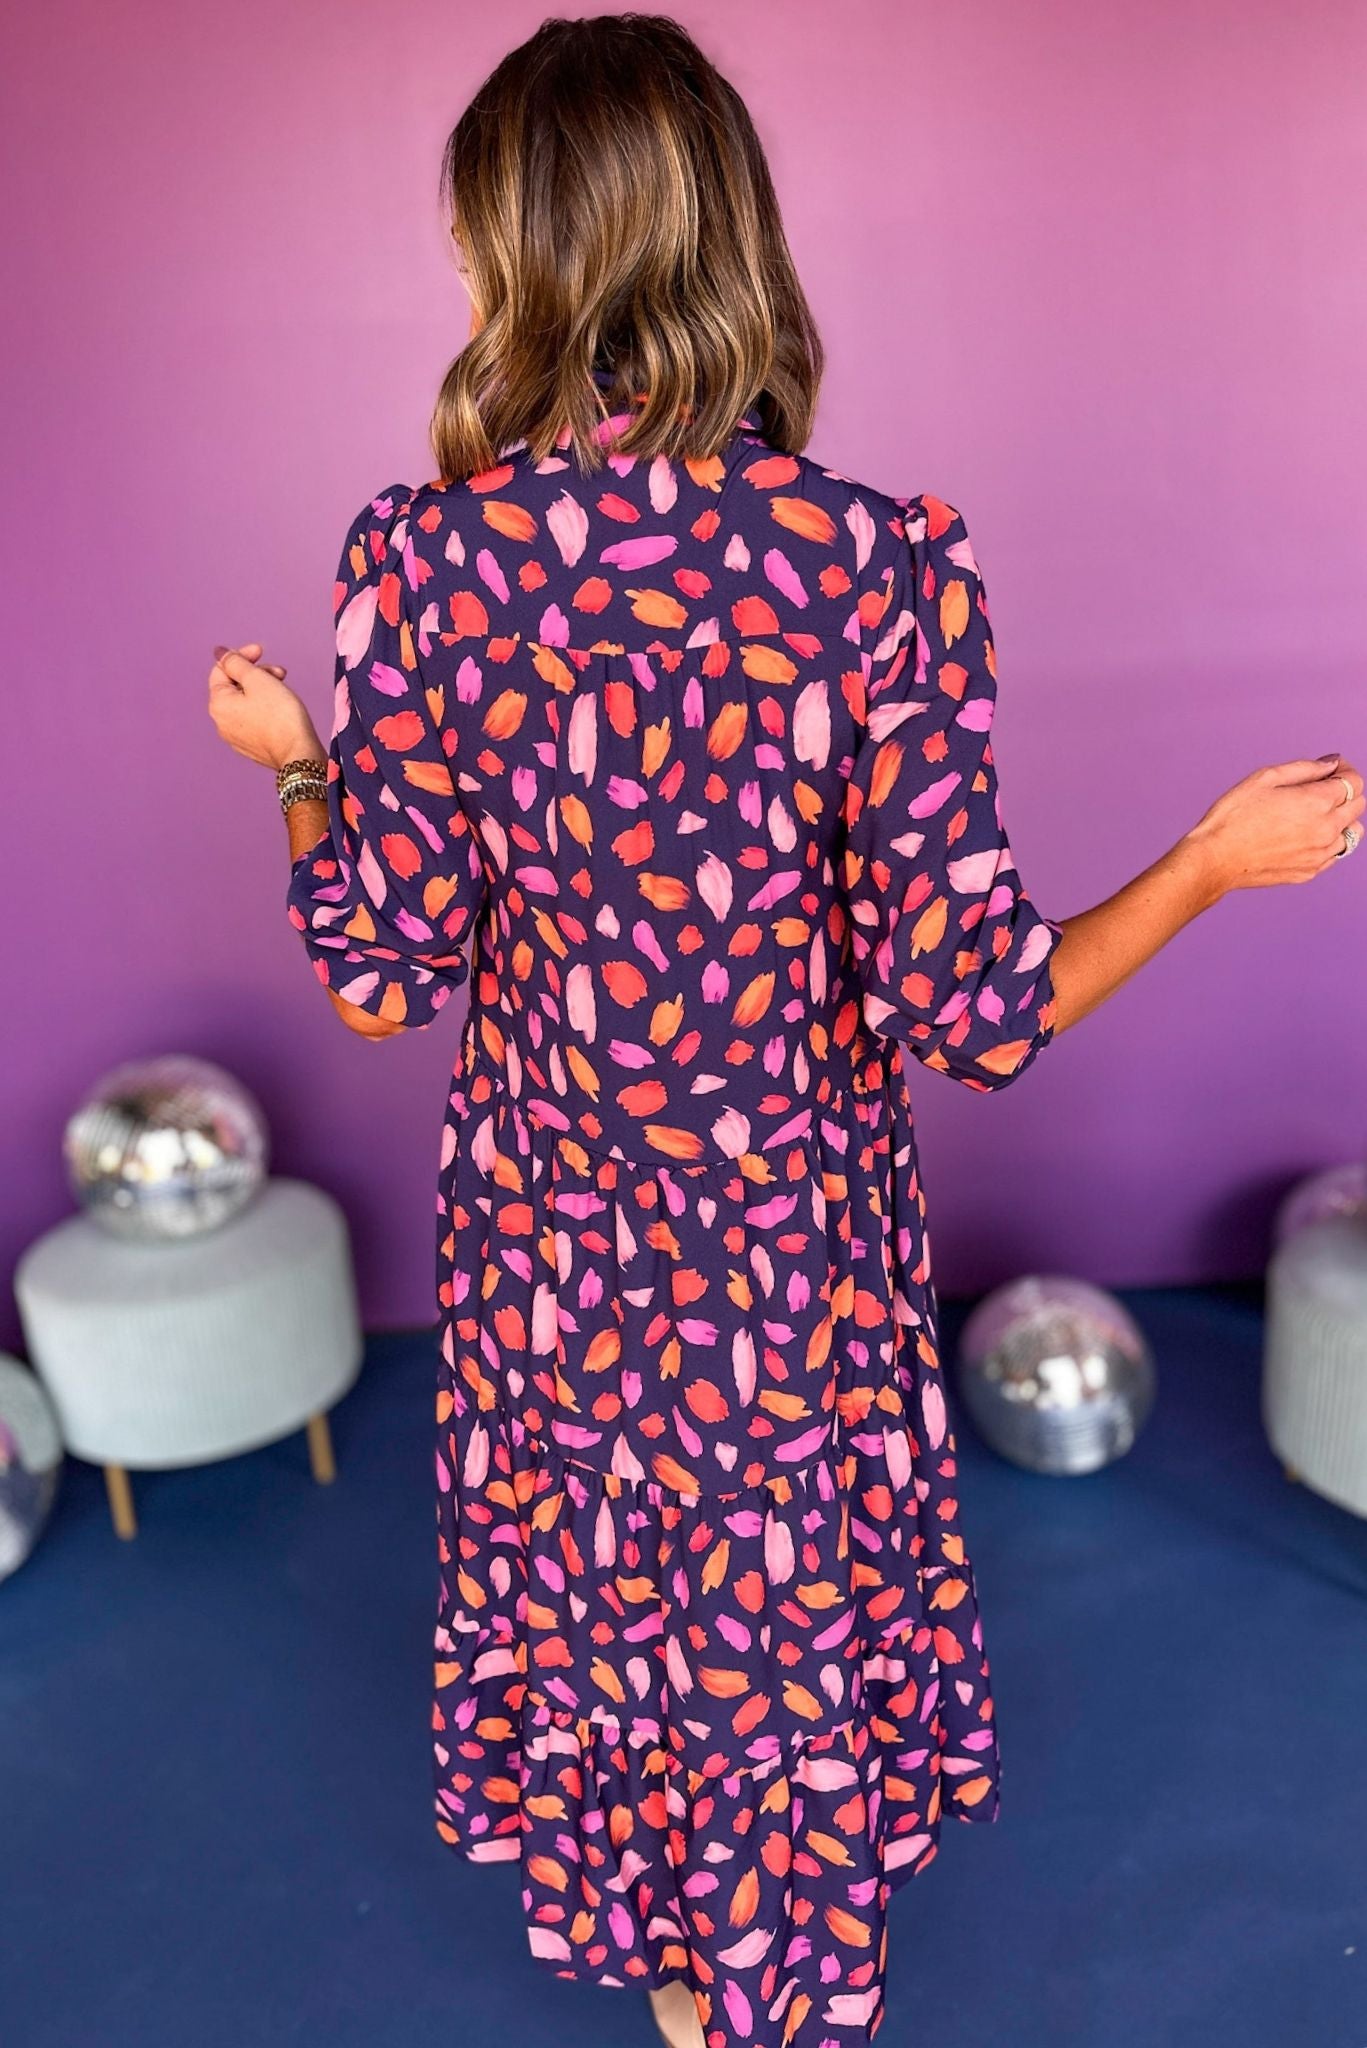 SSYS The Emery Dress In Navy Brush Print, SSYS the label, ssys dress, must have dress, must have print, must have style, elevated style, elevated dress, mom style, shop style your senses by mallory fitzsimmons